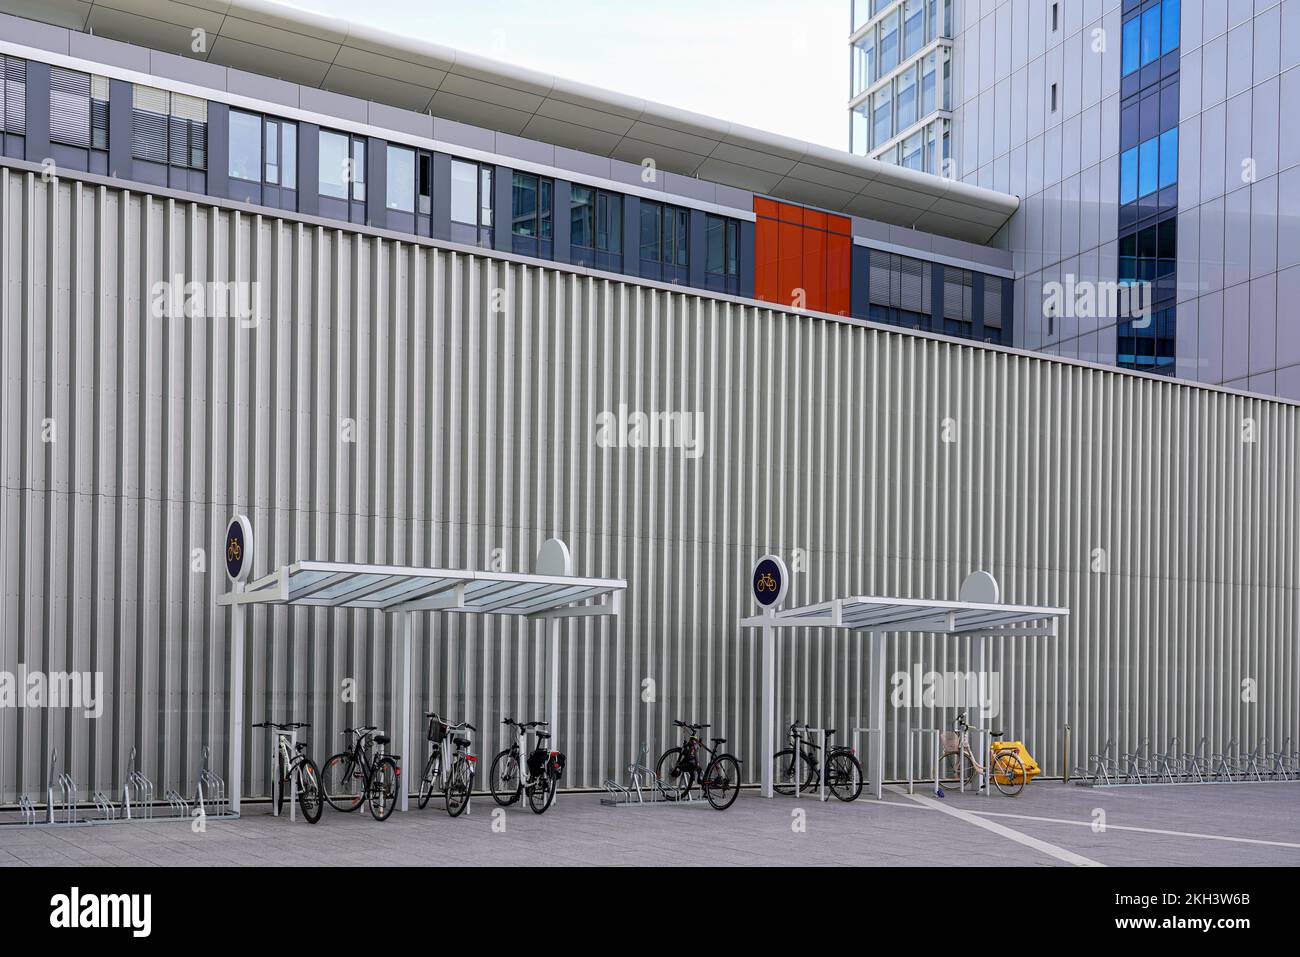 Bicycle racks at the Konrad Adenauer building on rue Alcide De Gasperi in the European Quarter (Luxembourg) on the Kirchberg Plateau. Stock Photo